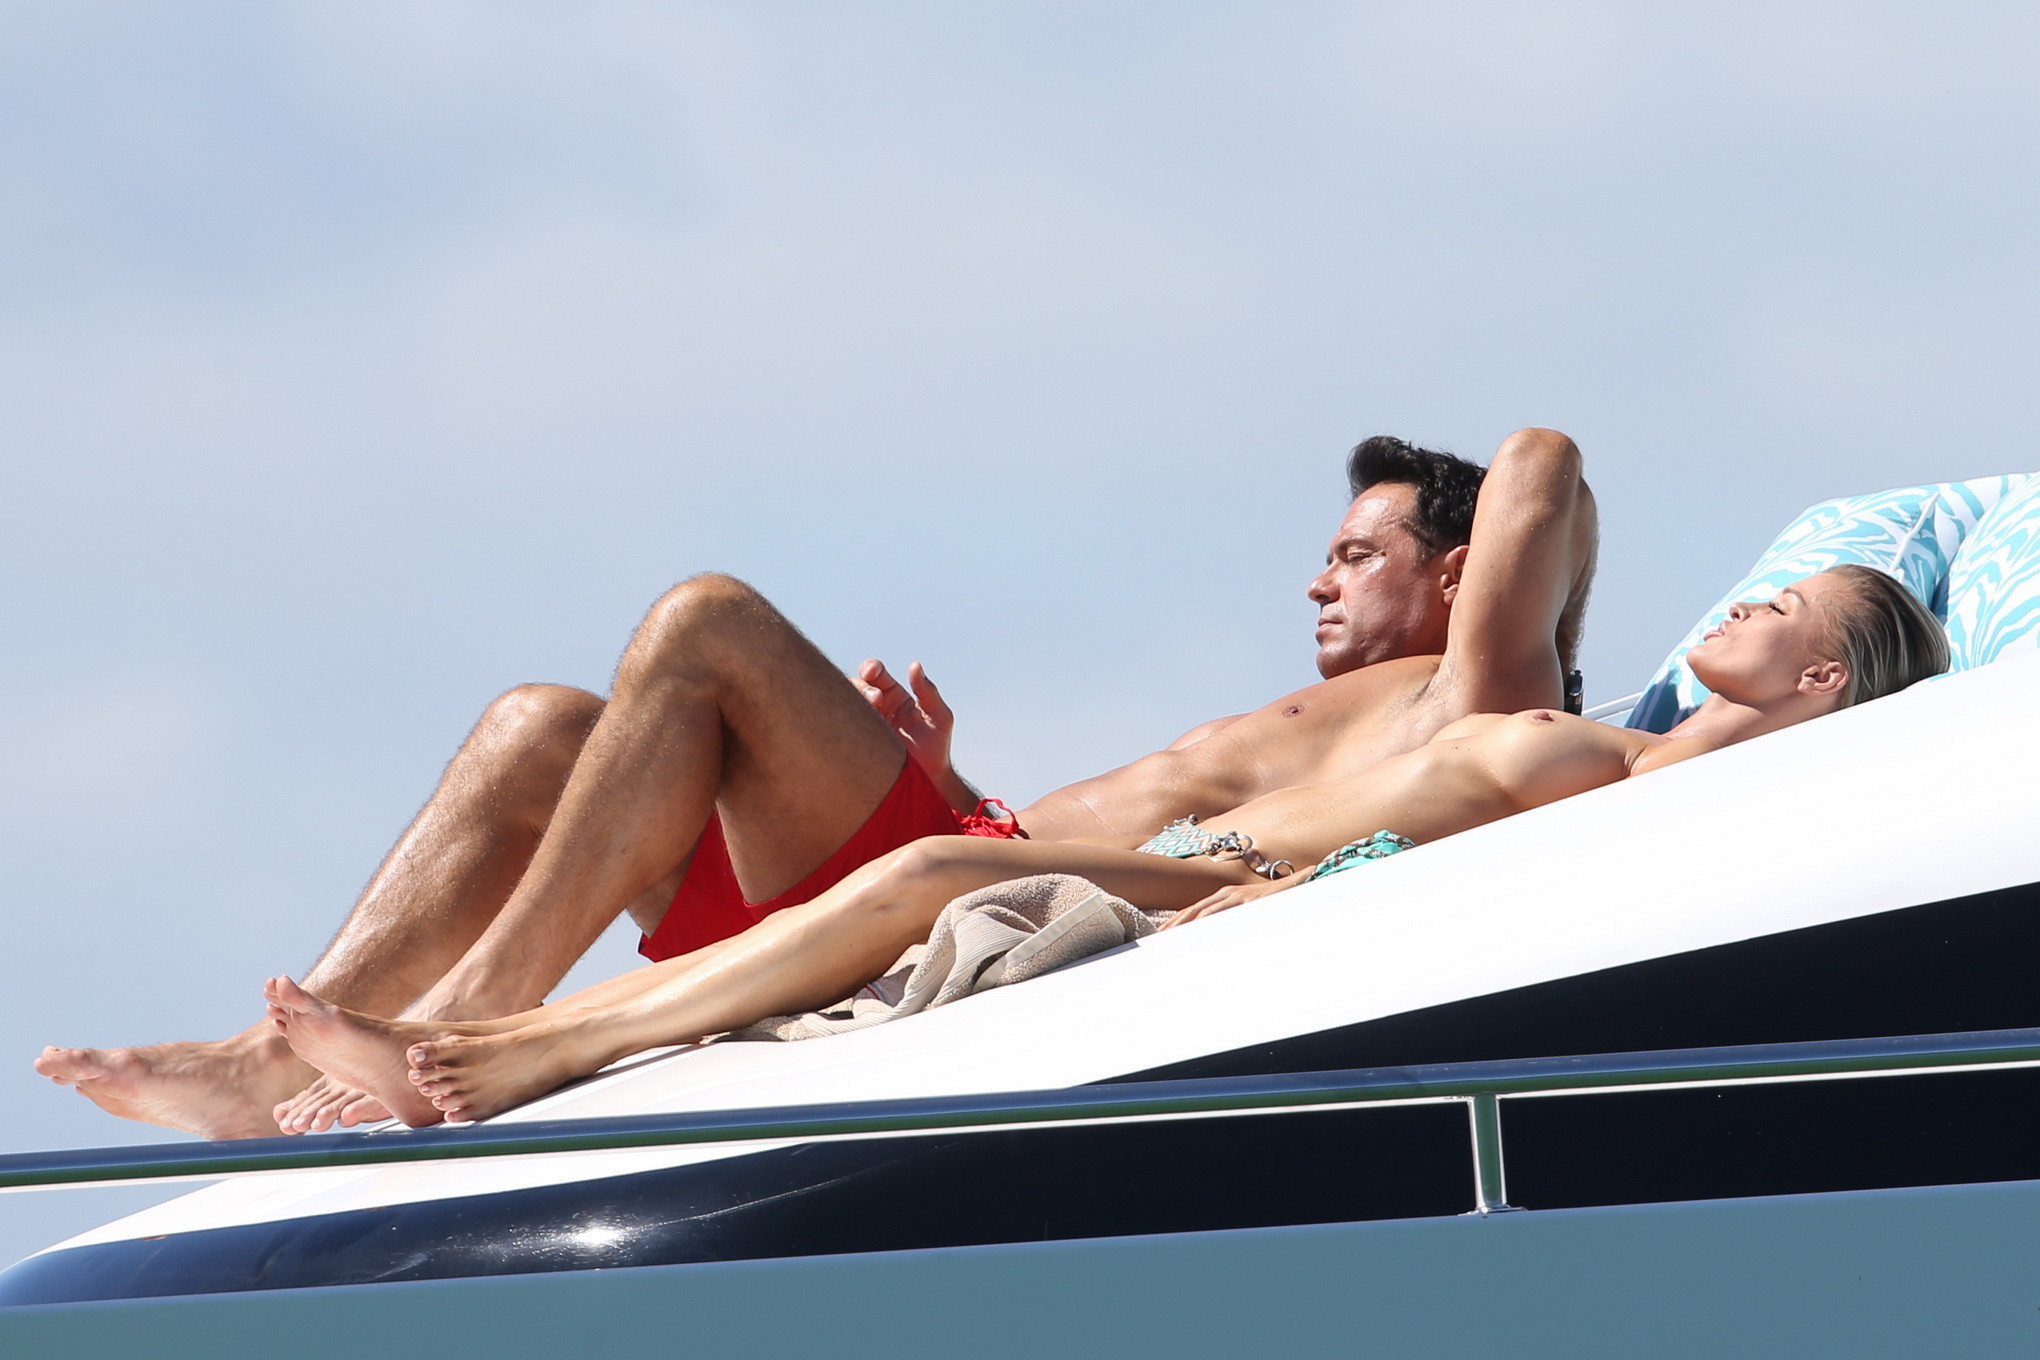 Joanna Krupa tanning topless at the yacht in Miami #75146091